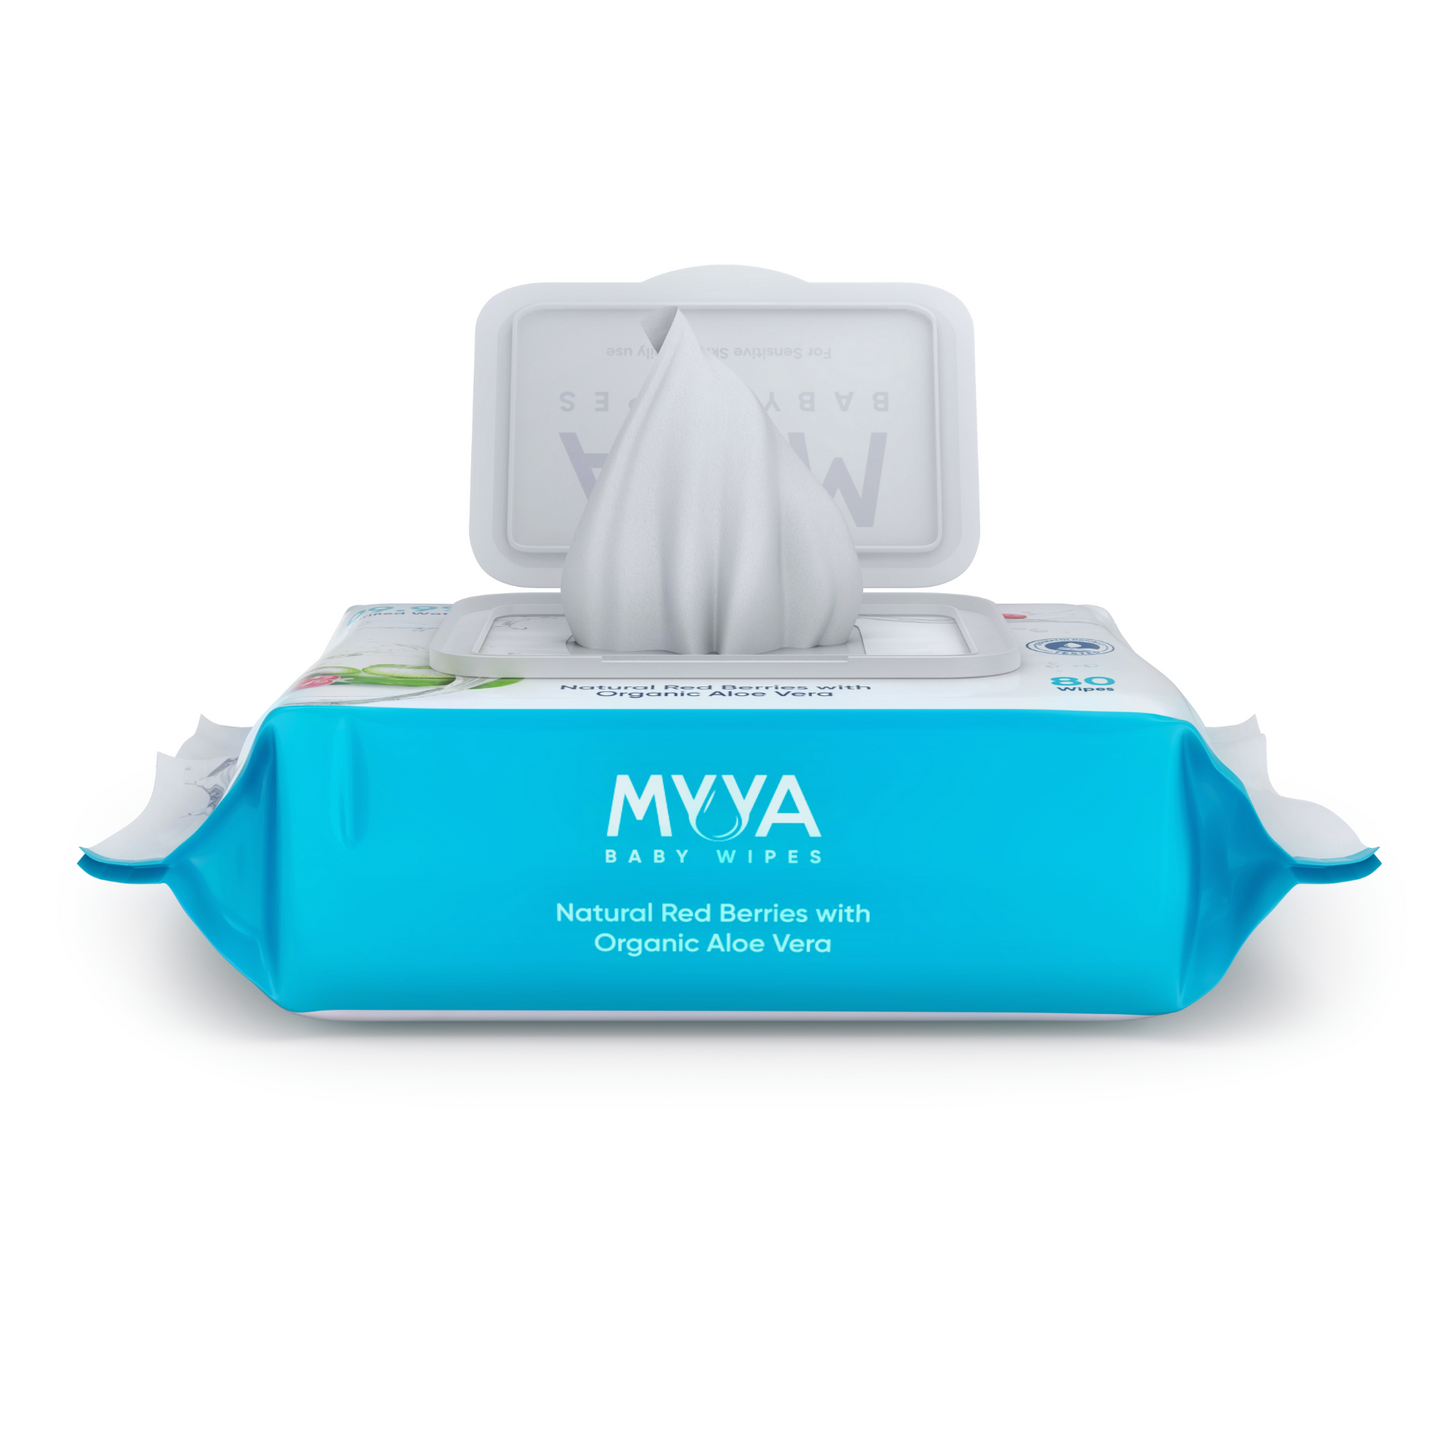 Pack of 80 Myya Baby Wipes with Aloe Vera and Red Berries